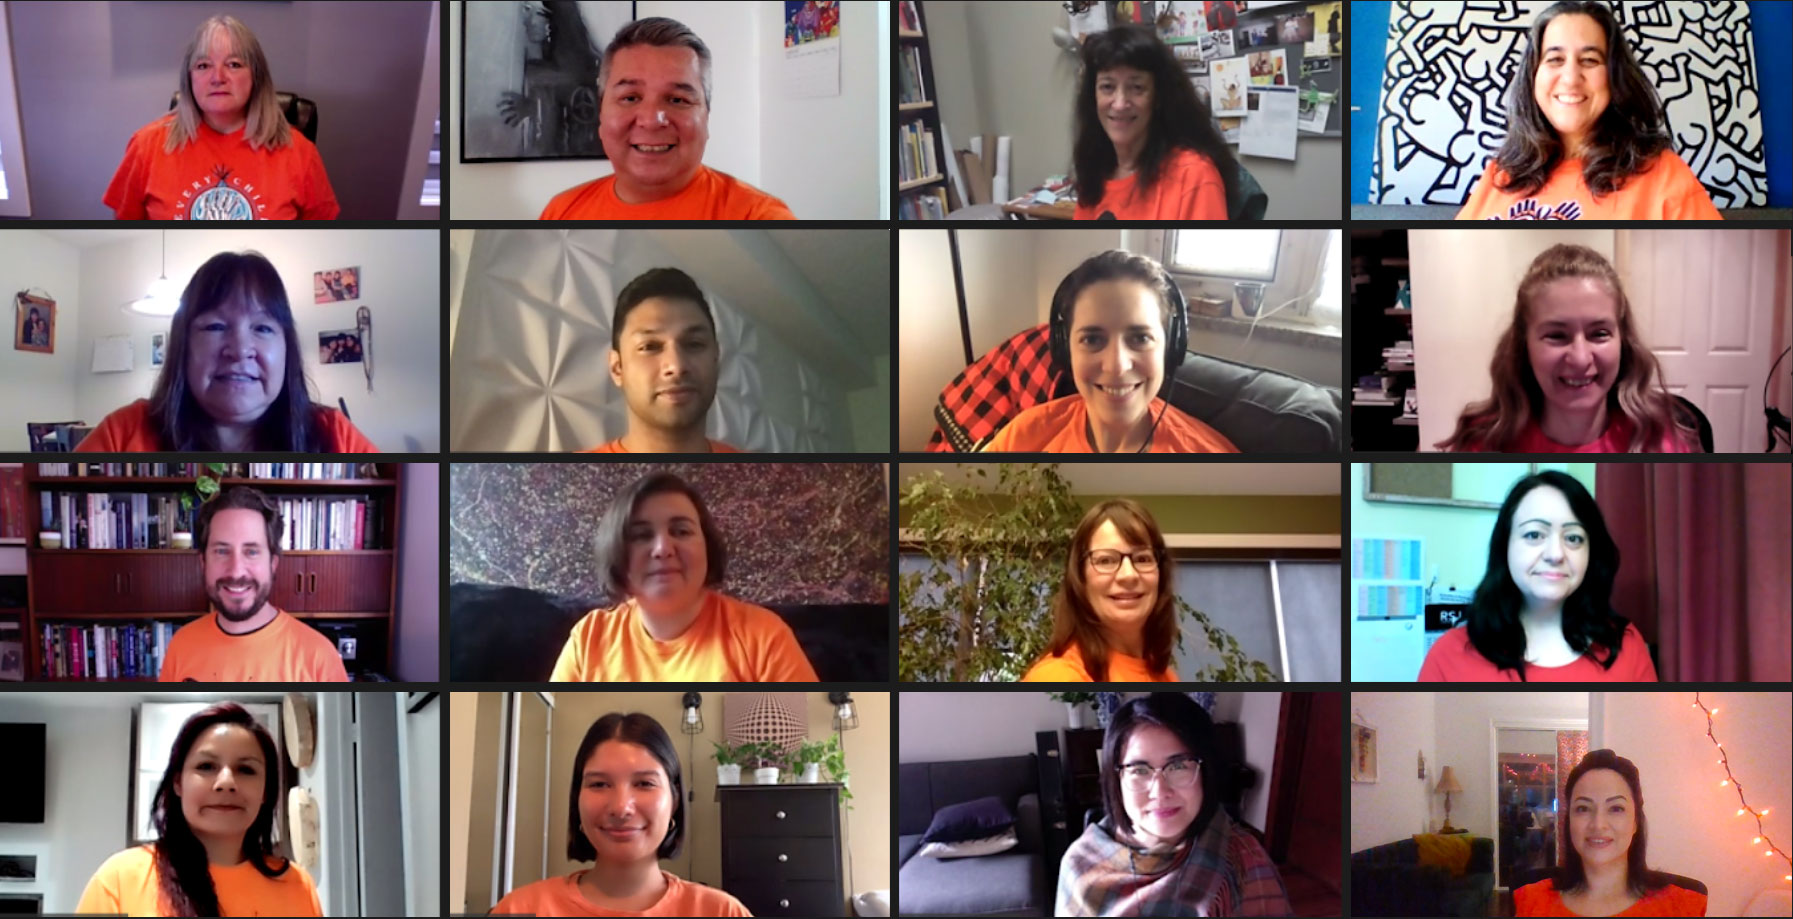 Members of the Orange Shirt Day 2020 planning committee gathered for a virtual group photo on Zoom to honour Orange Shirt Day.